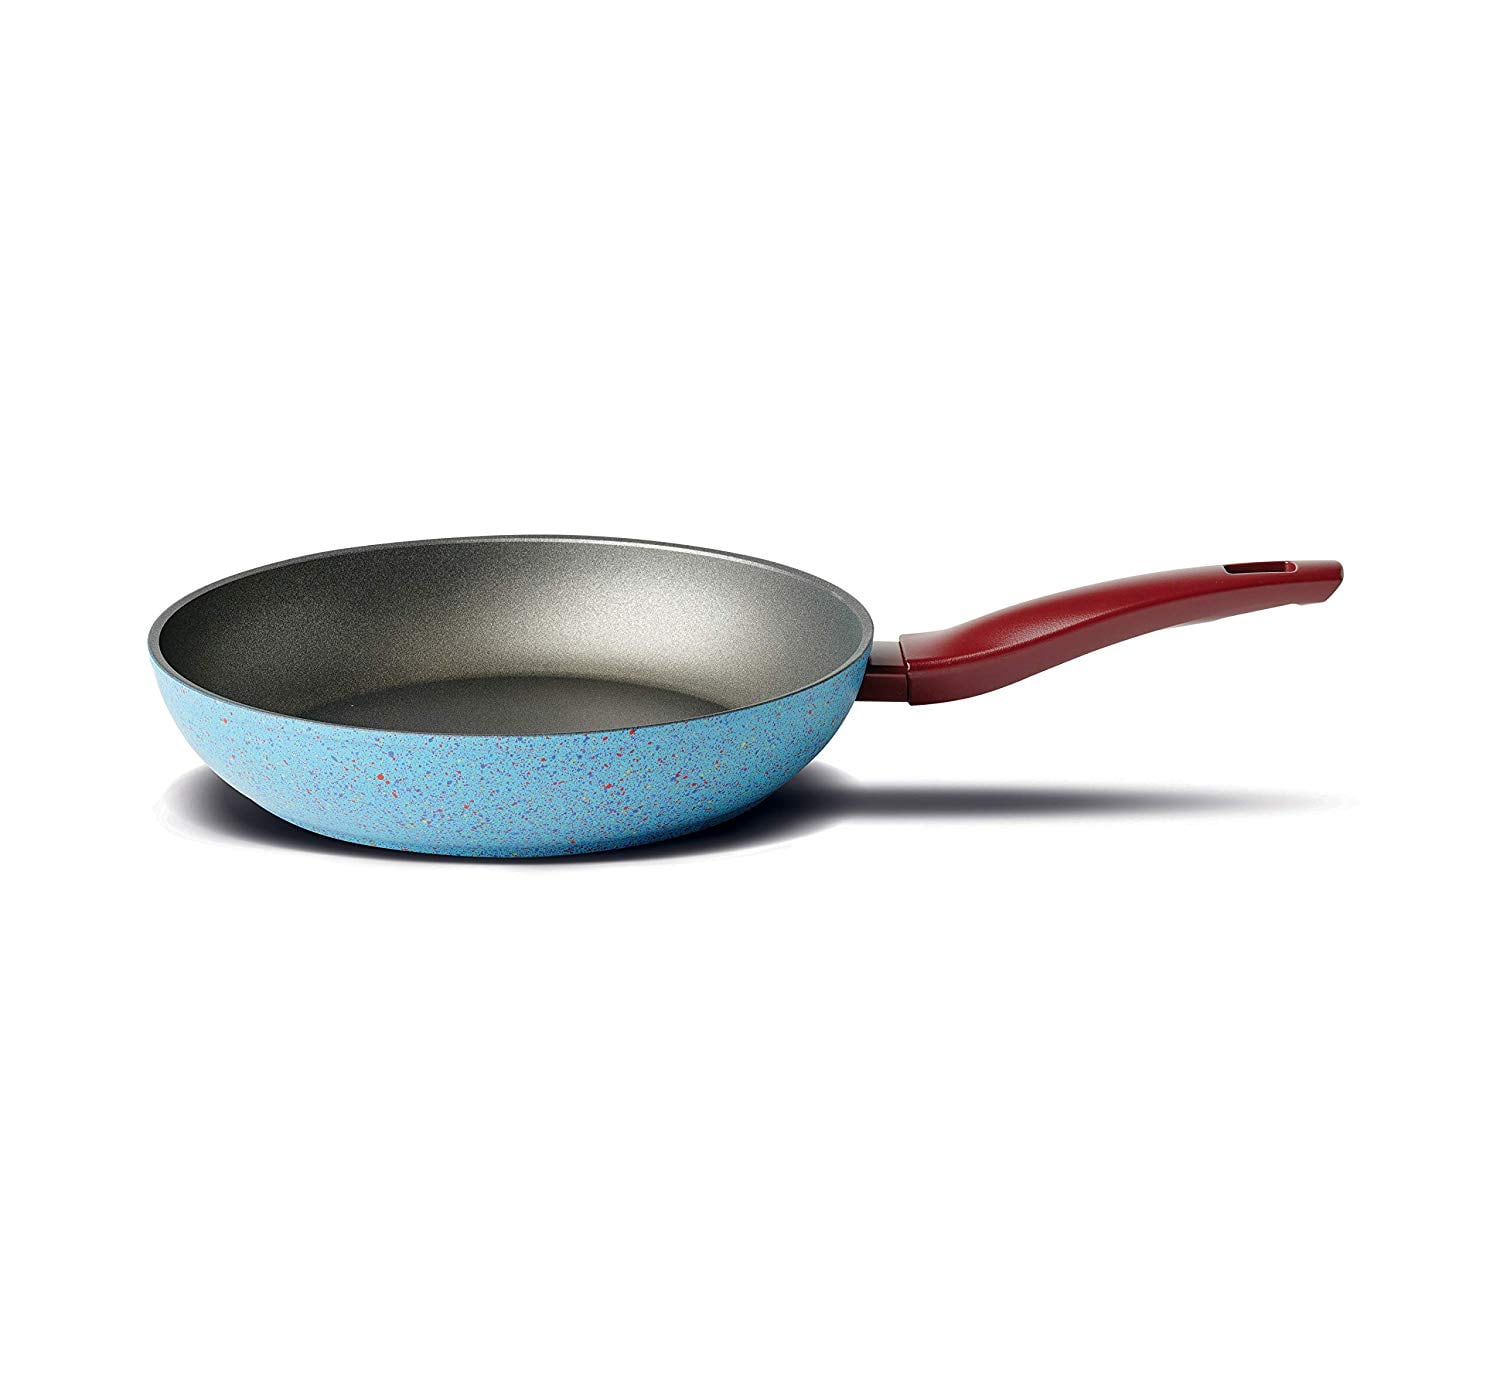 KICHLY 11 Inch Aluminum Alloy and Scratch Resistant Body 28 cm Induction Bottom Nonstick Frying Pan Riveted Handle 